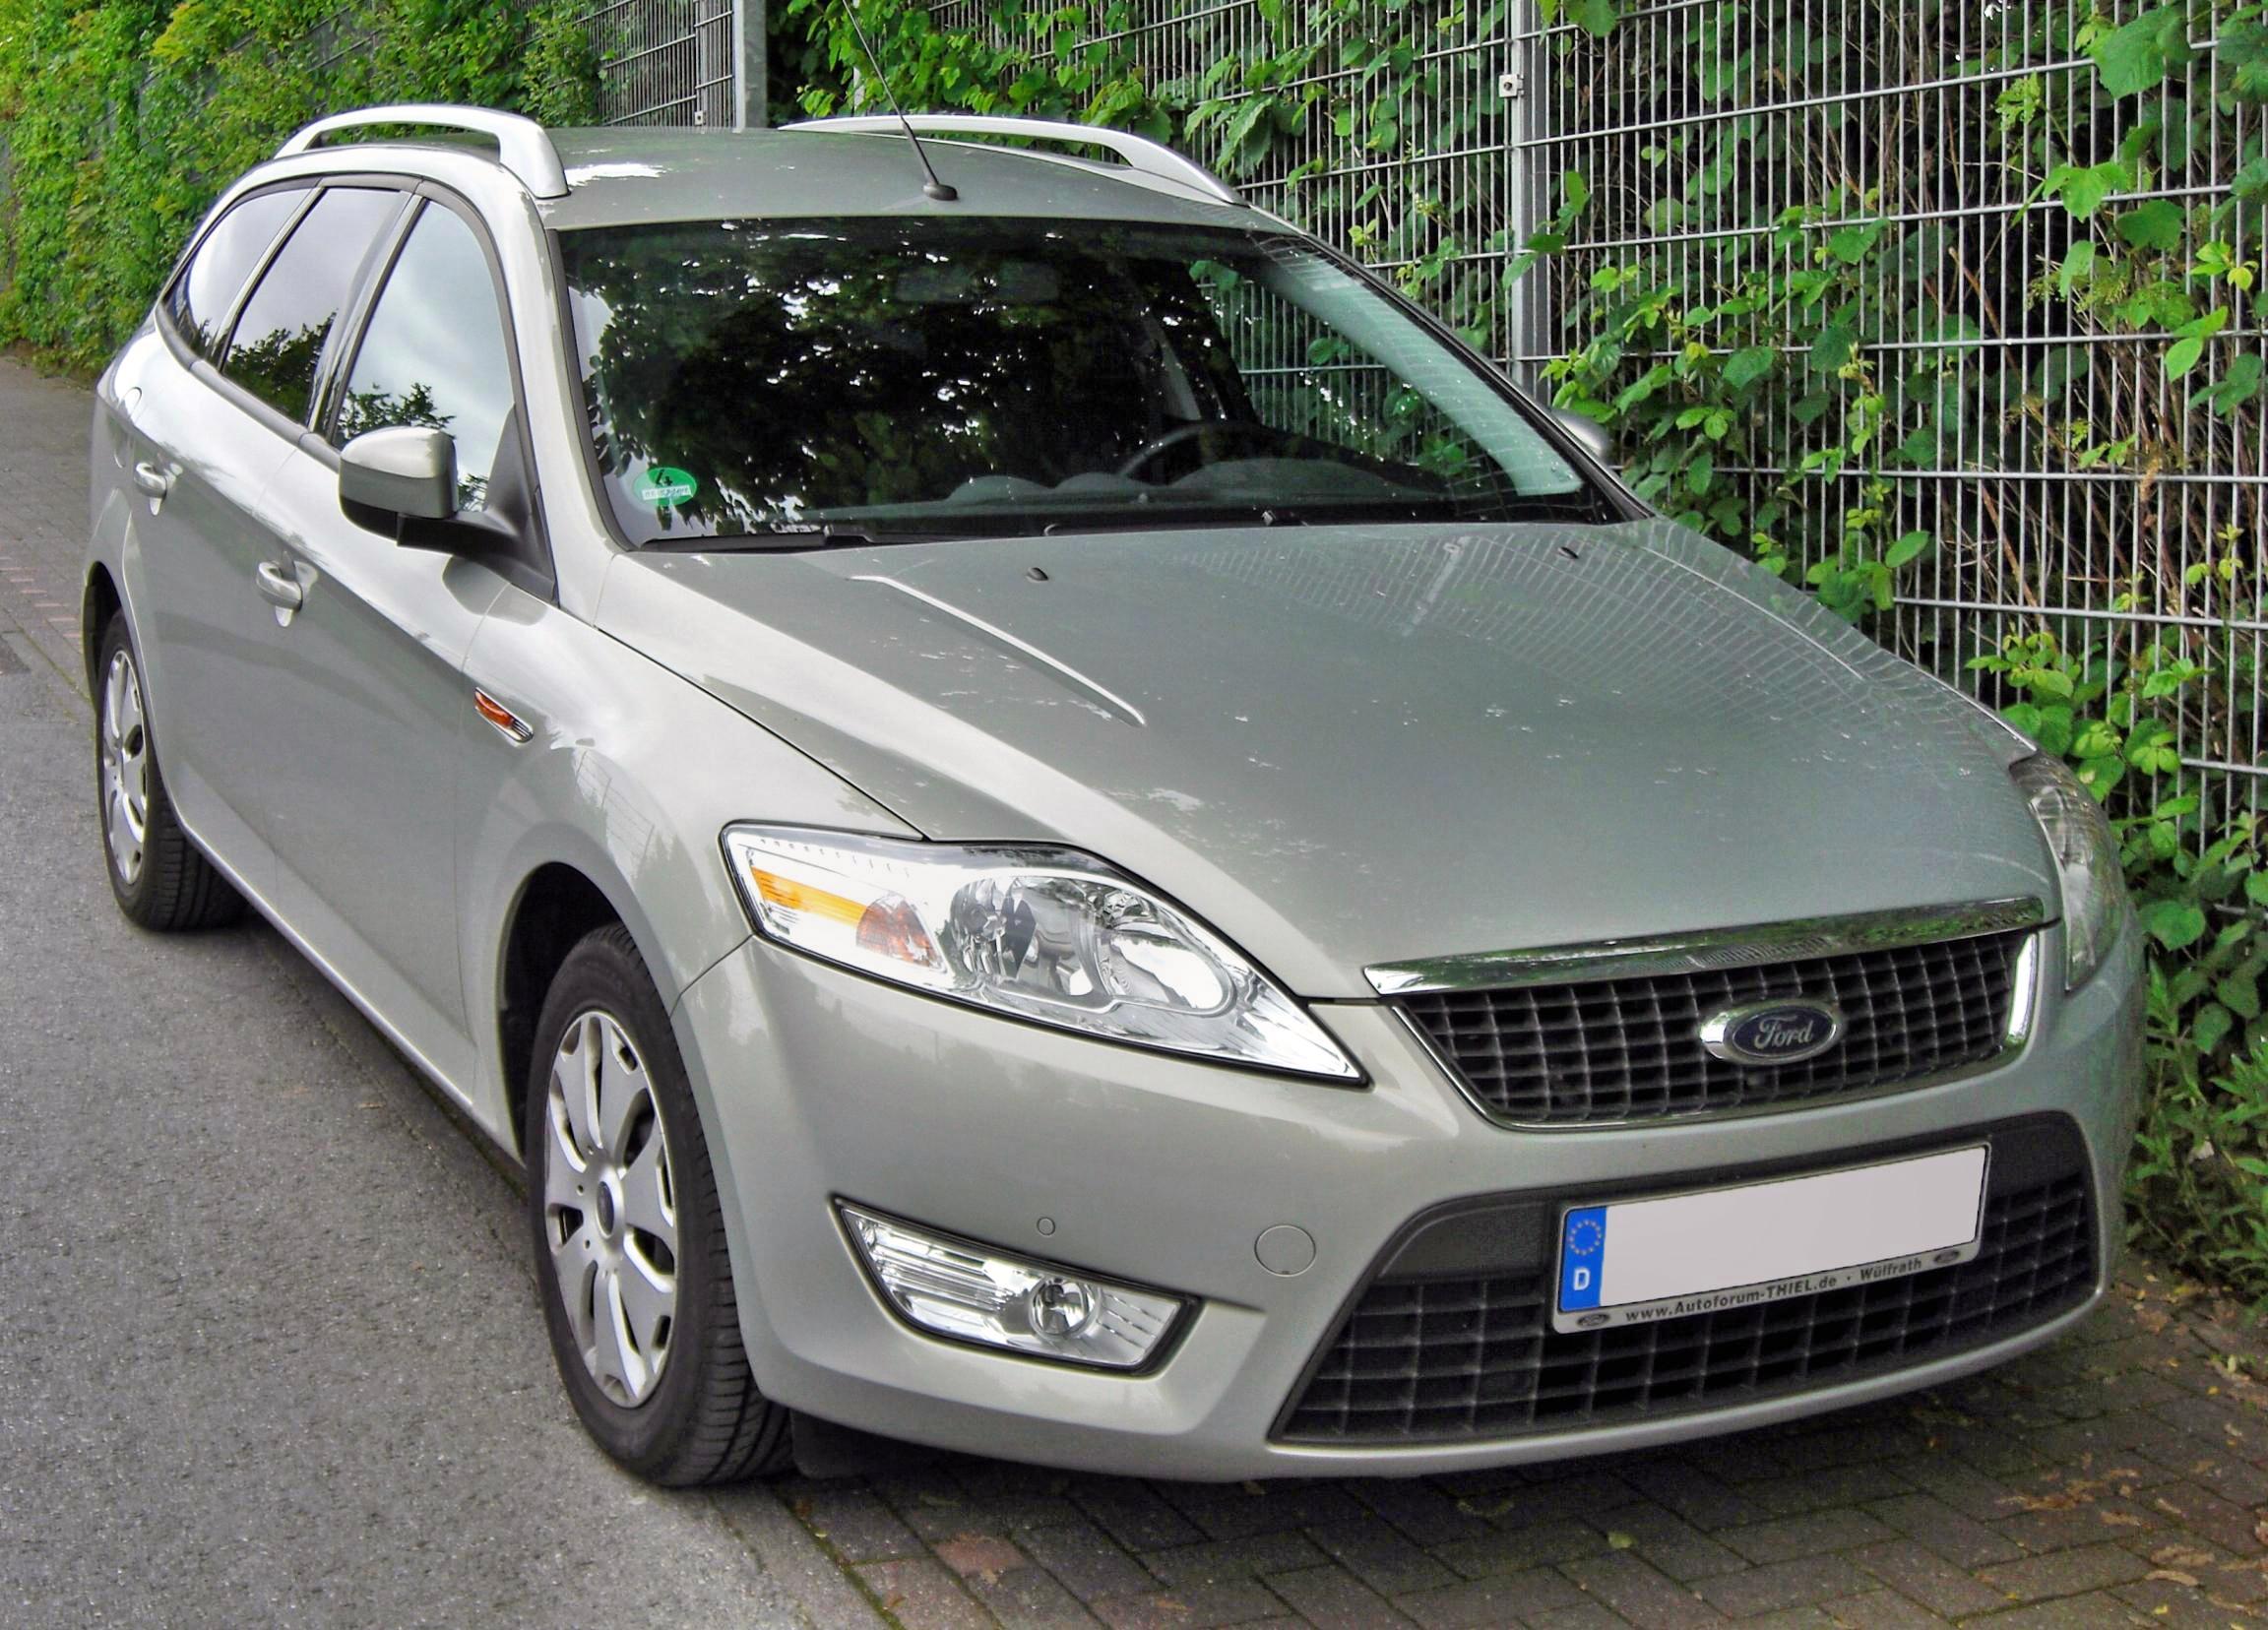 Mondeo tdci. Ford Mondeo IV Turnier. Ford Mondeo 2007. Ford Mondeo Turnier 2009. Ford Mondeo Wagon 2010.